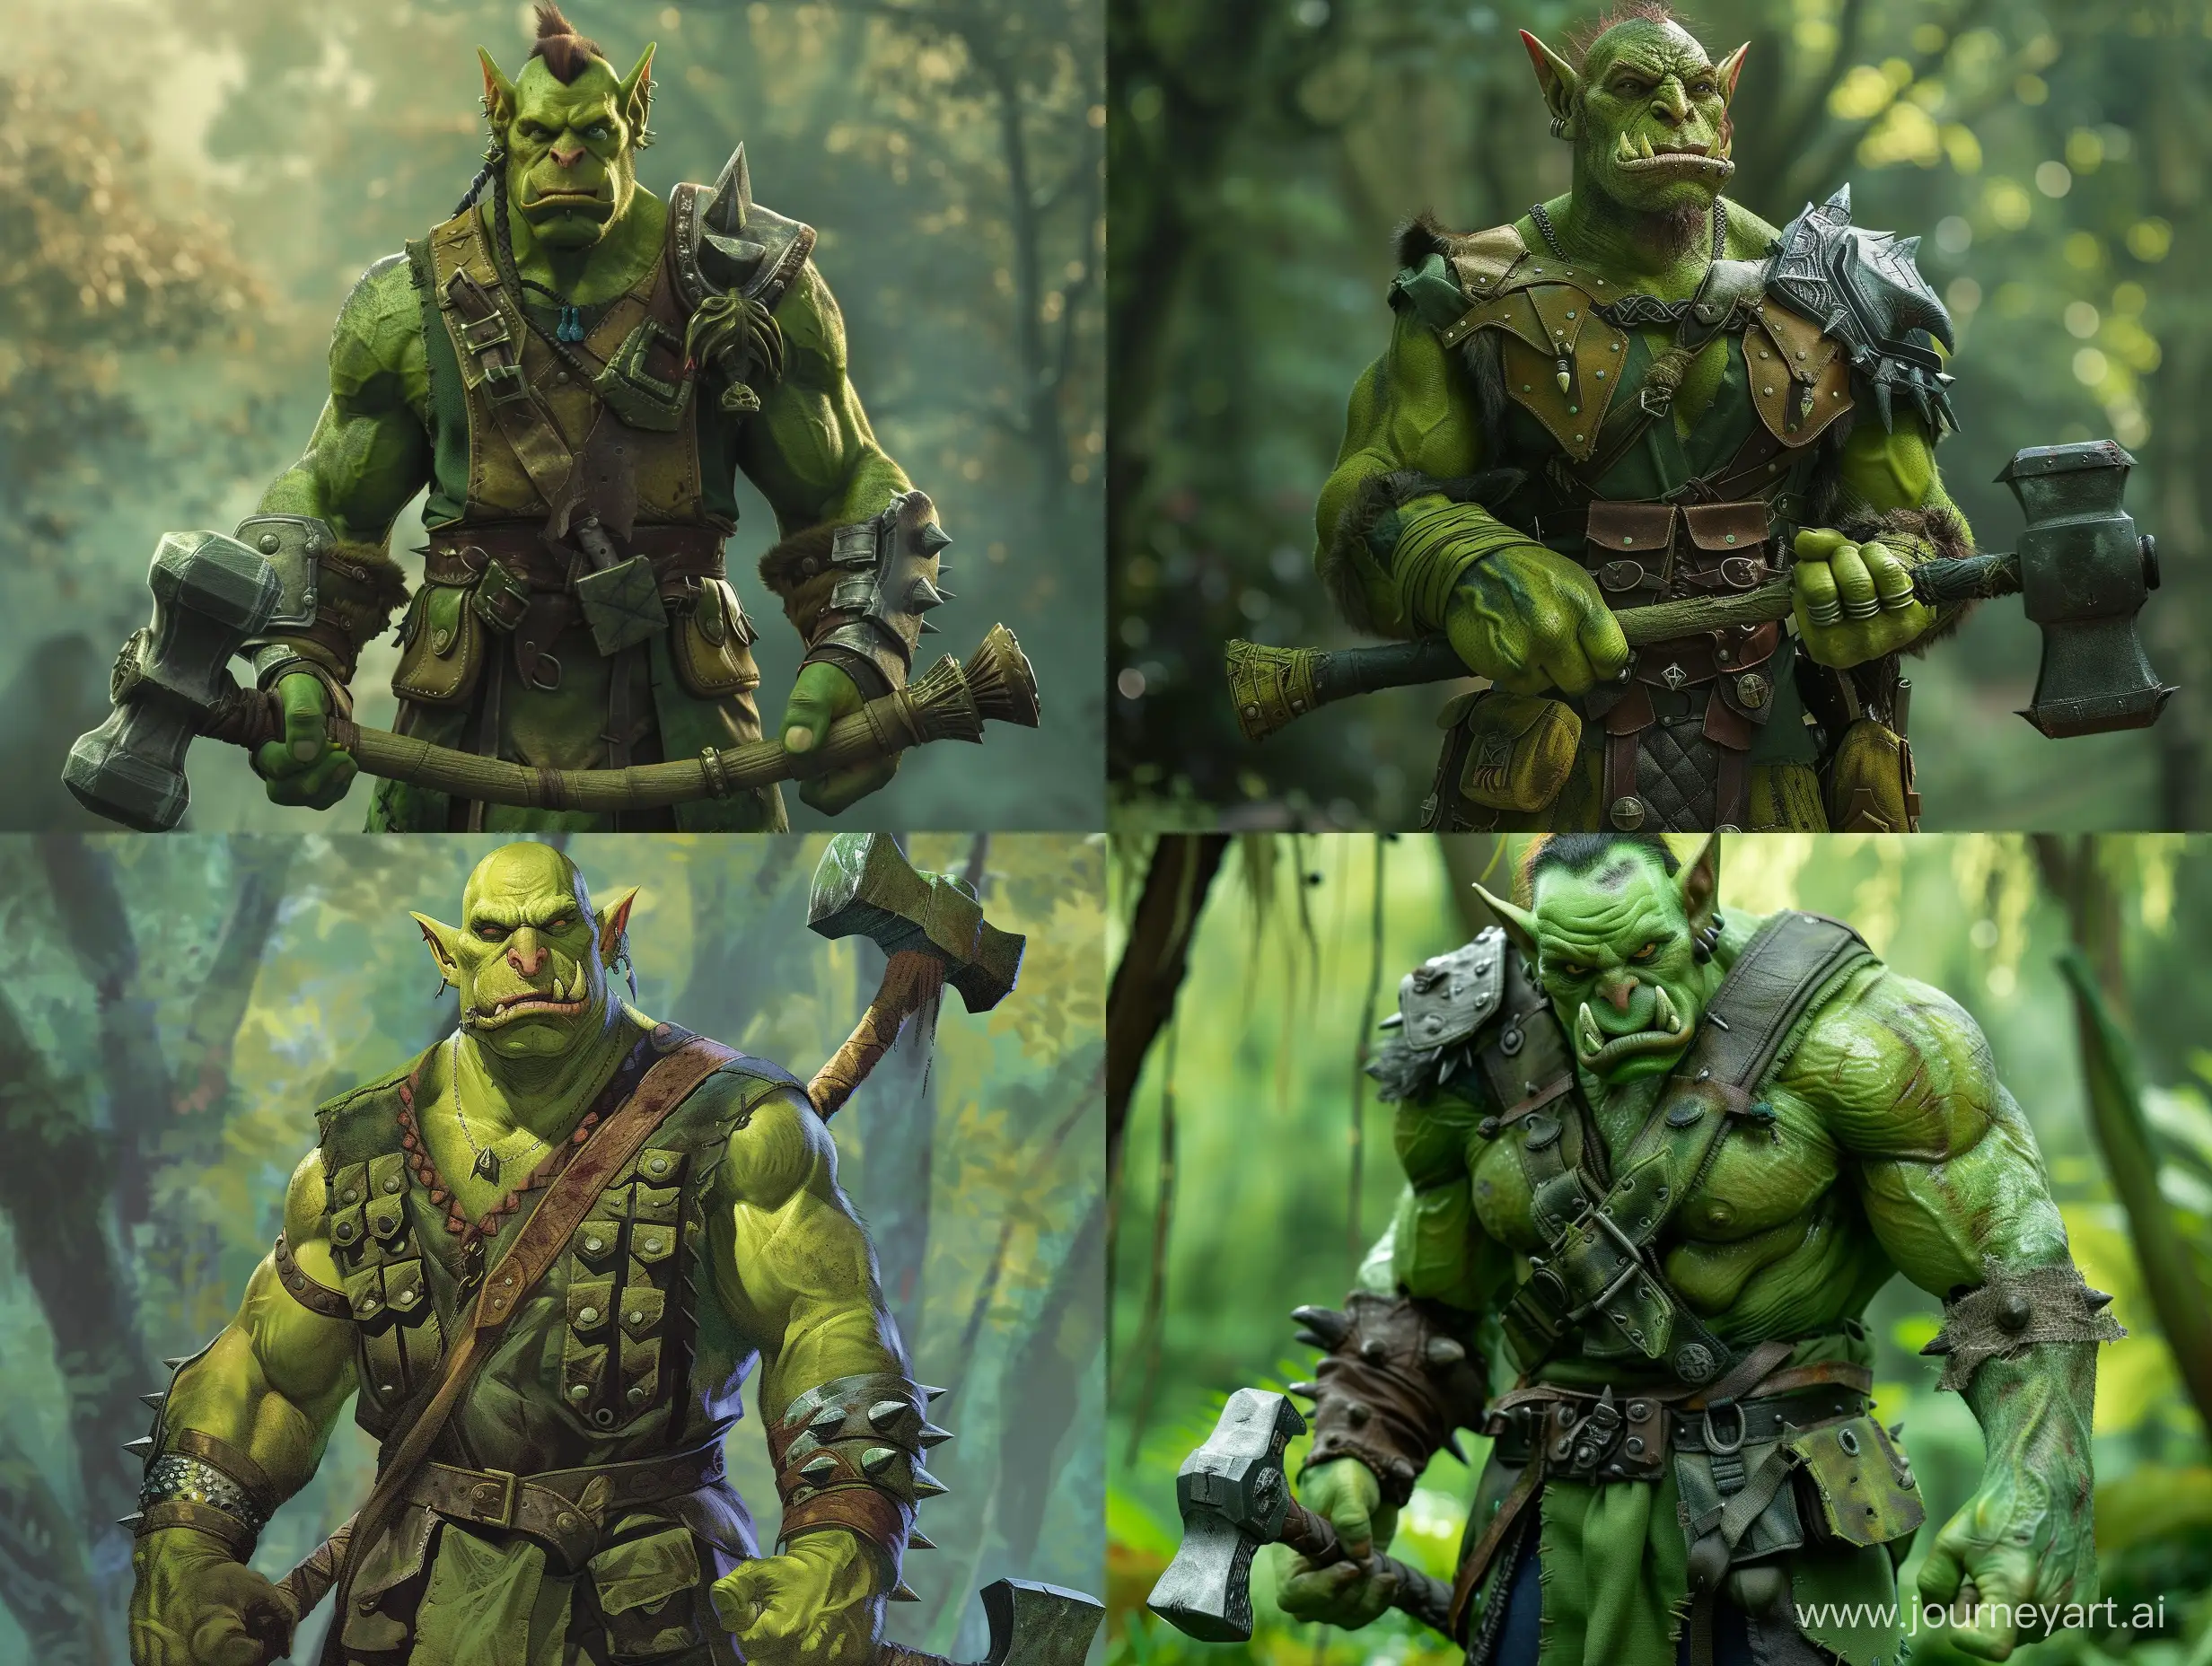 Greenskinned-Orc-Warrior-Wielding-a-TwoHanded-War-Hammer-in-Forest-Setting